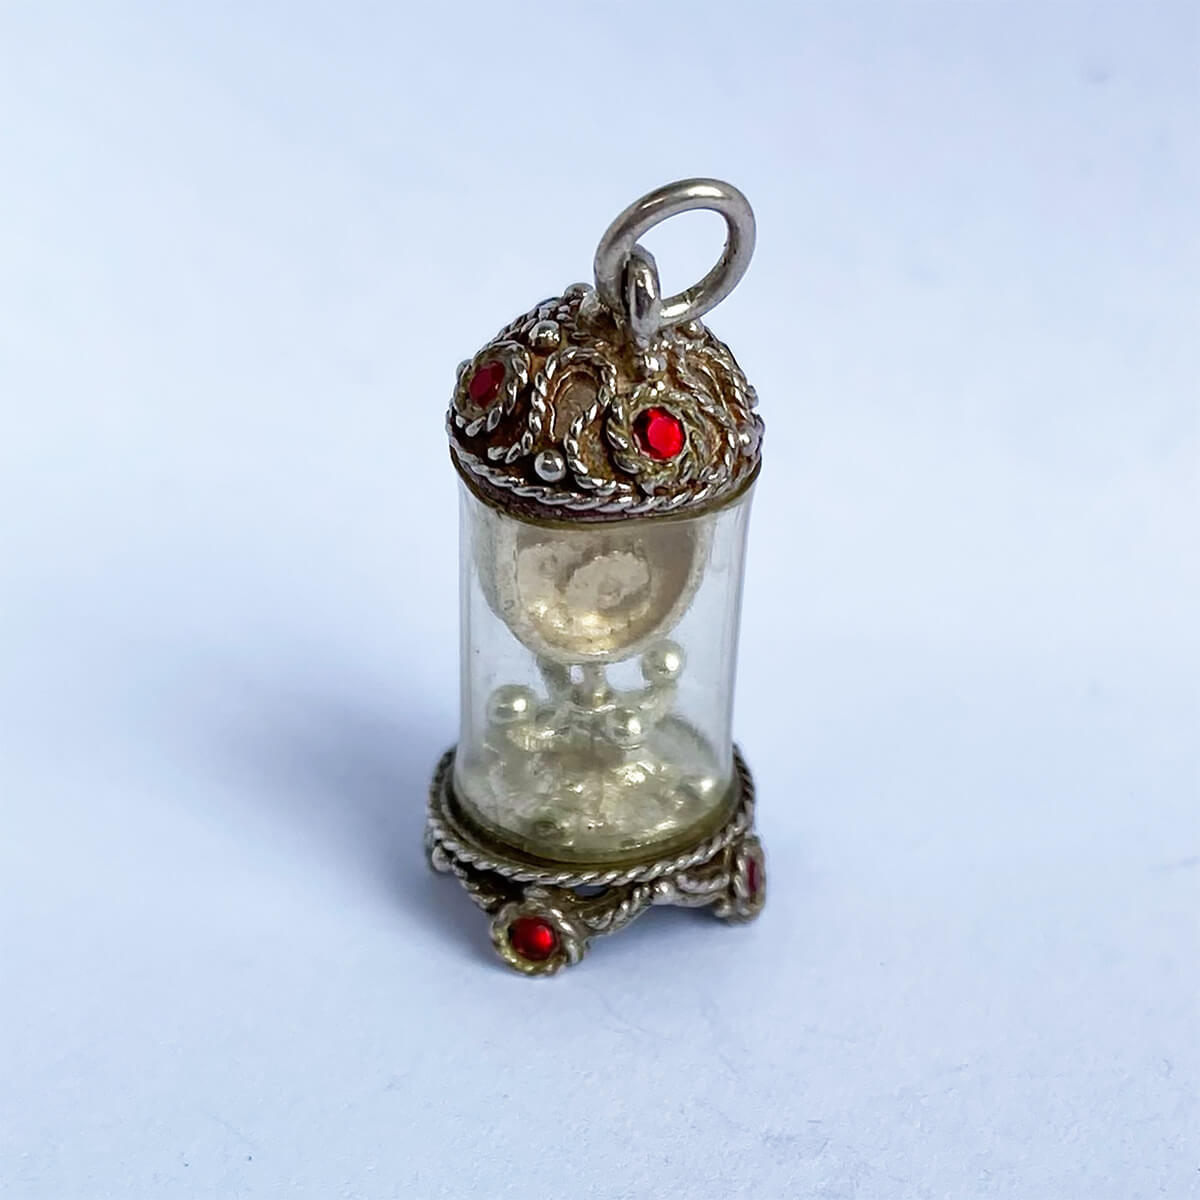 Vintage English silver Nuvo carriage clock charm with red crystals from Charmarama Charms